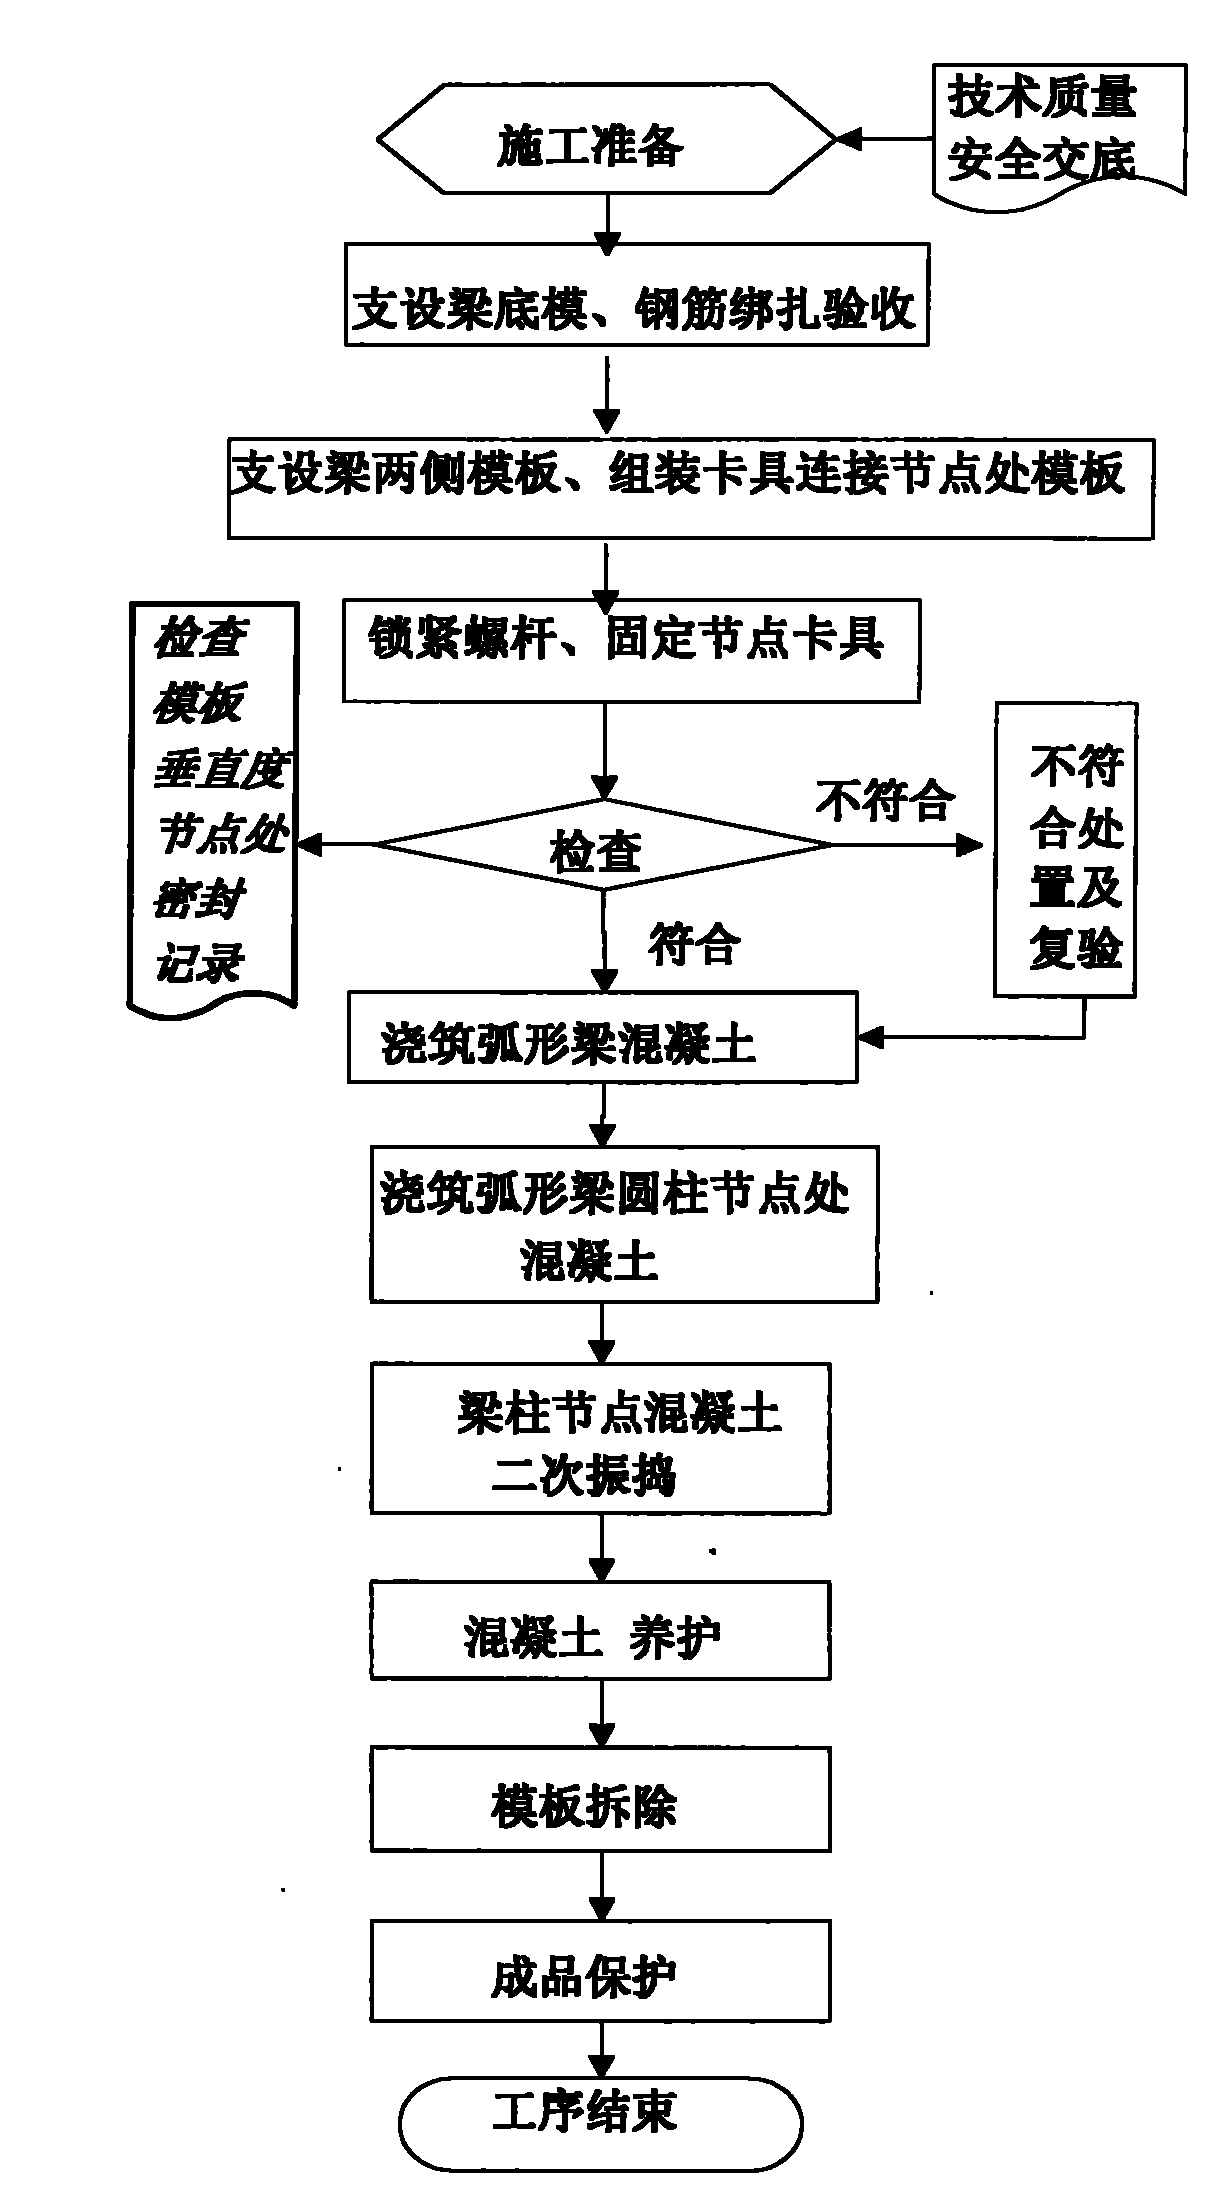 Construction method for adjustable arc-shaped beam cylindrical node assembling clamp